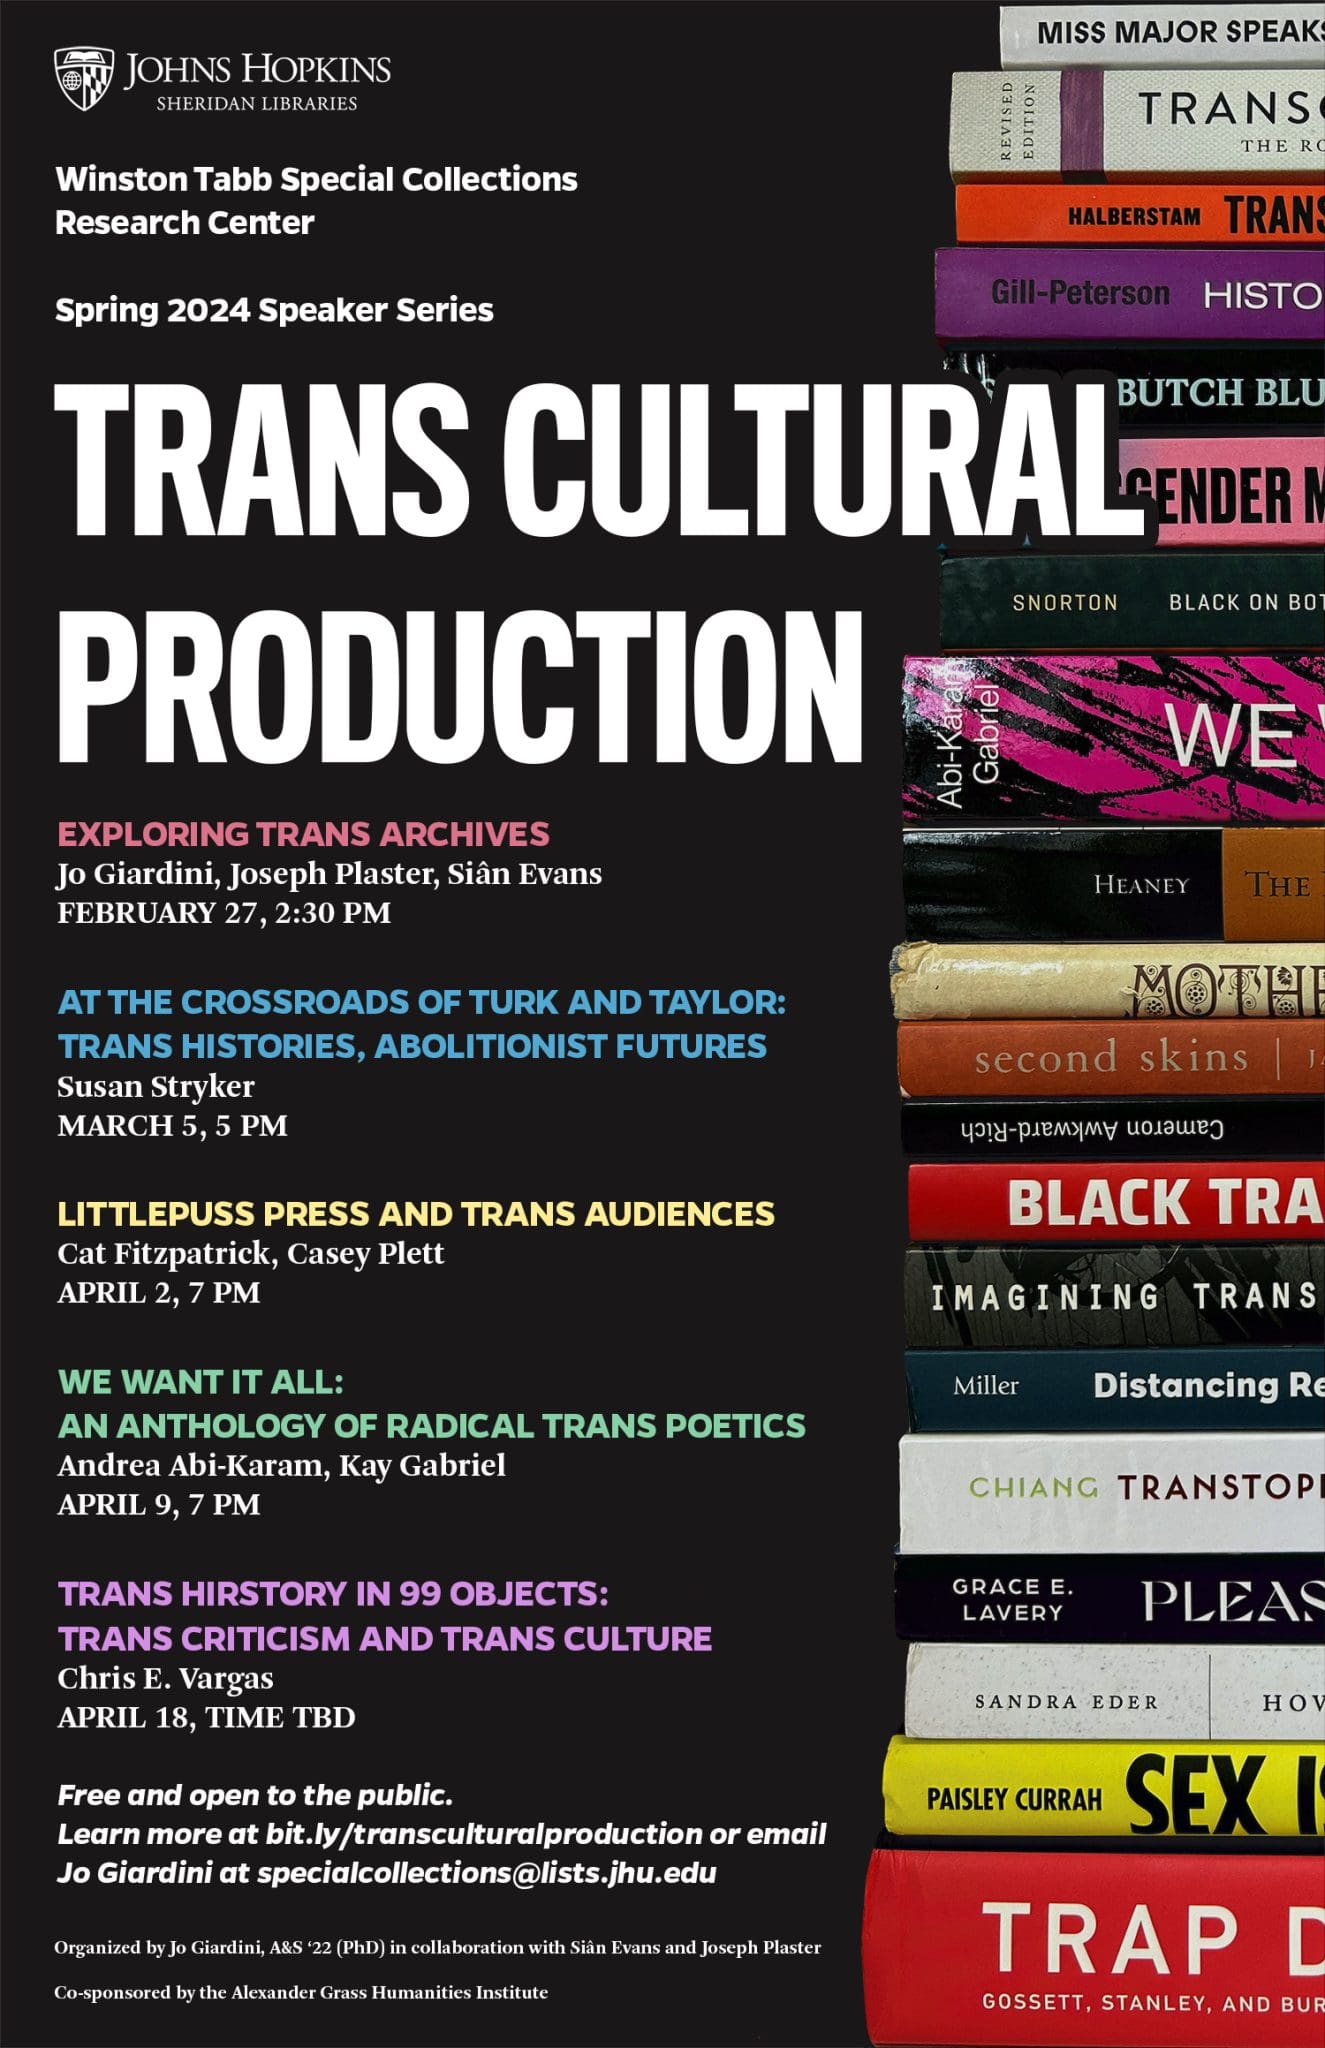 Trans Cultural Production series poster, with dates and info about events, over background graphic of book spines displaying relevant titles in trans studies.